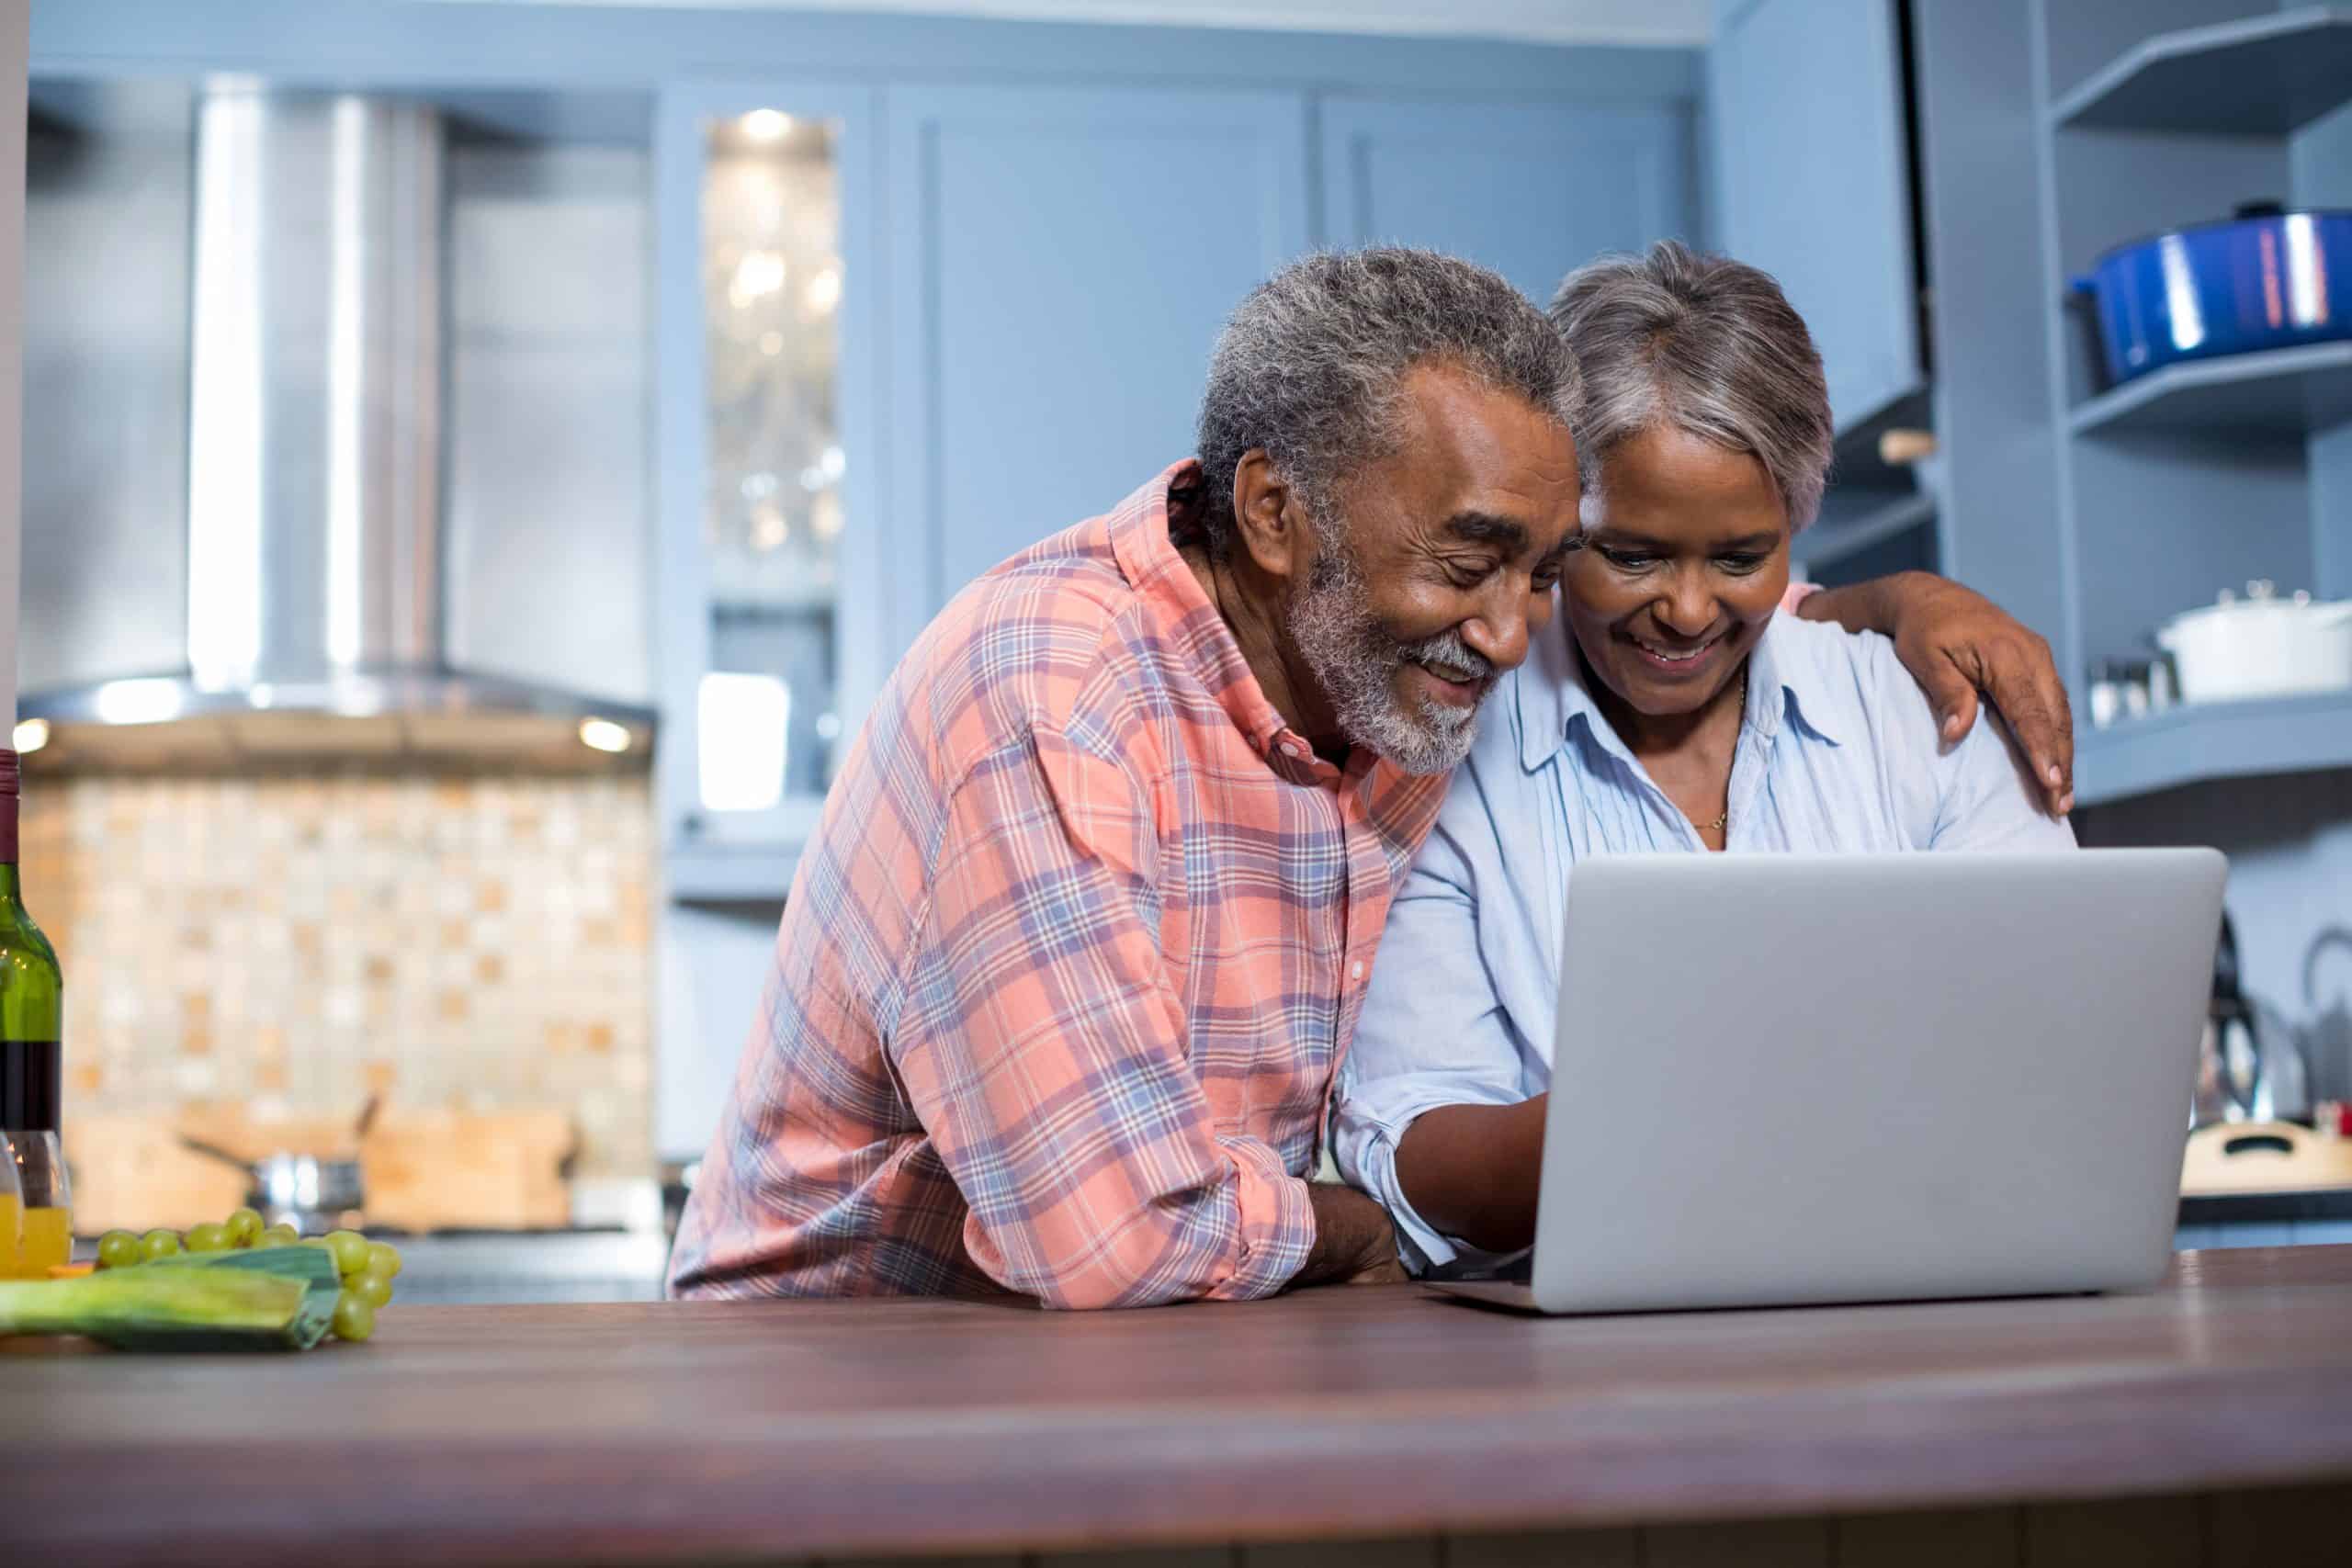 Smiling couple looking at a laptop